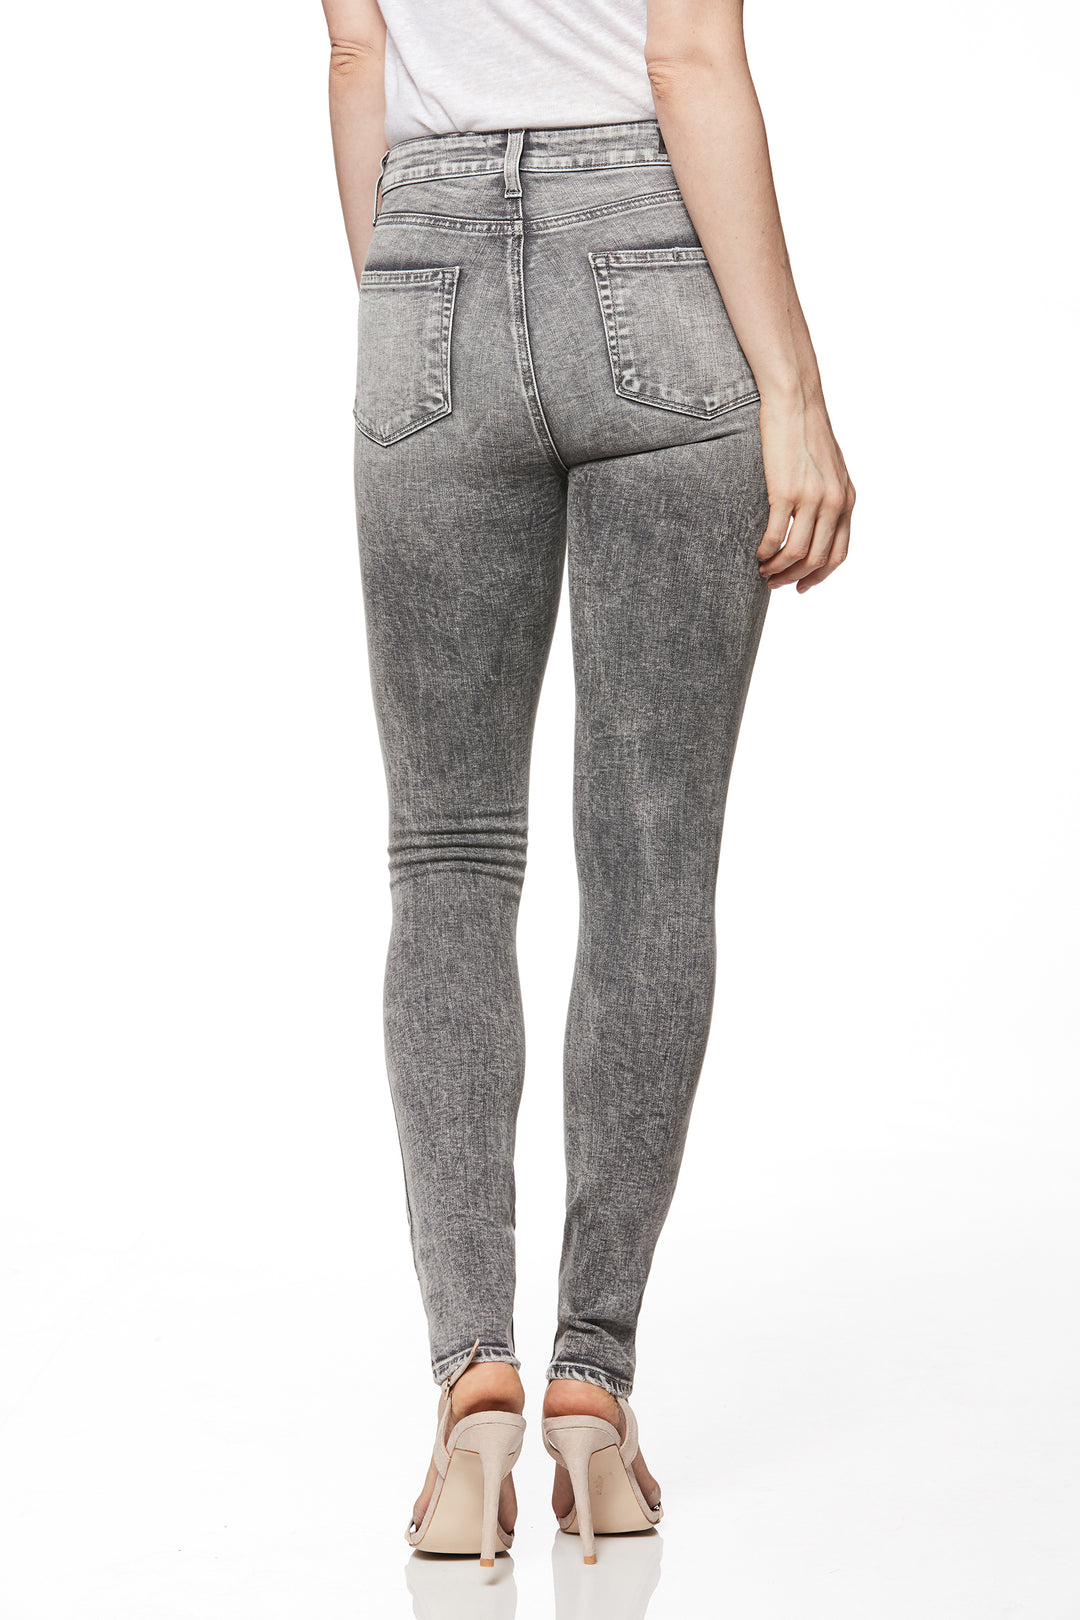 Paige - Hoxton Ultra Skinny in Chelsea Grey